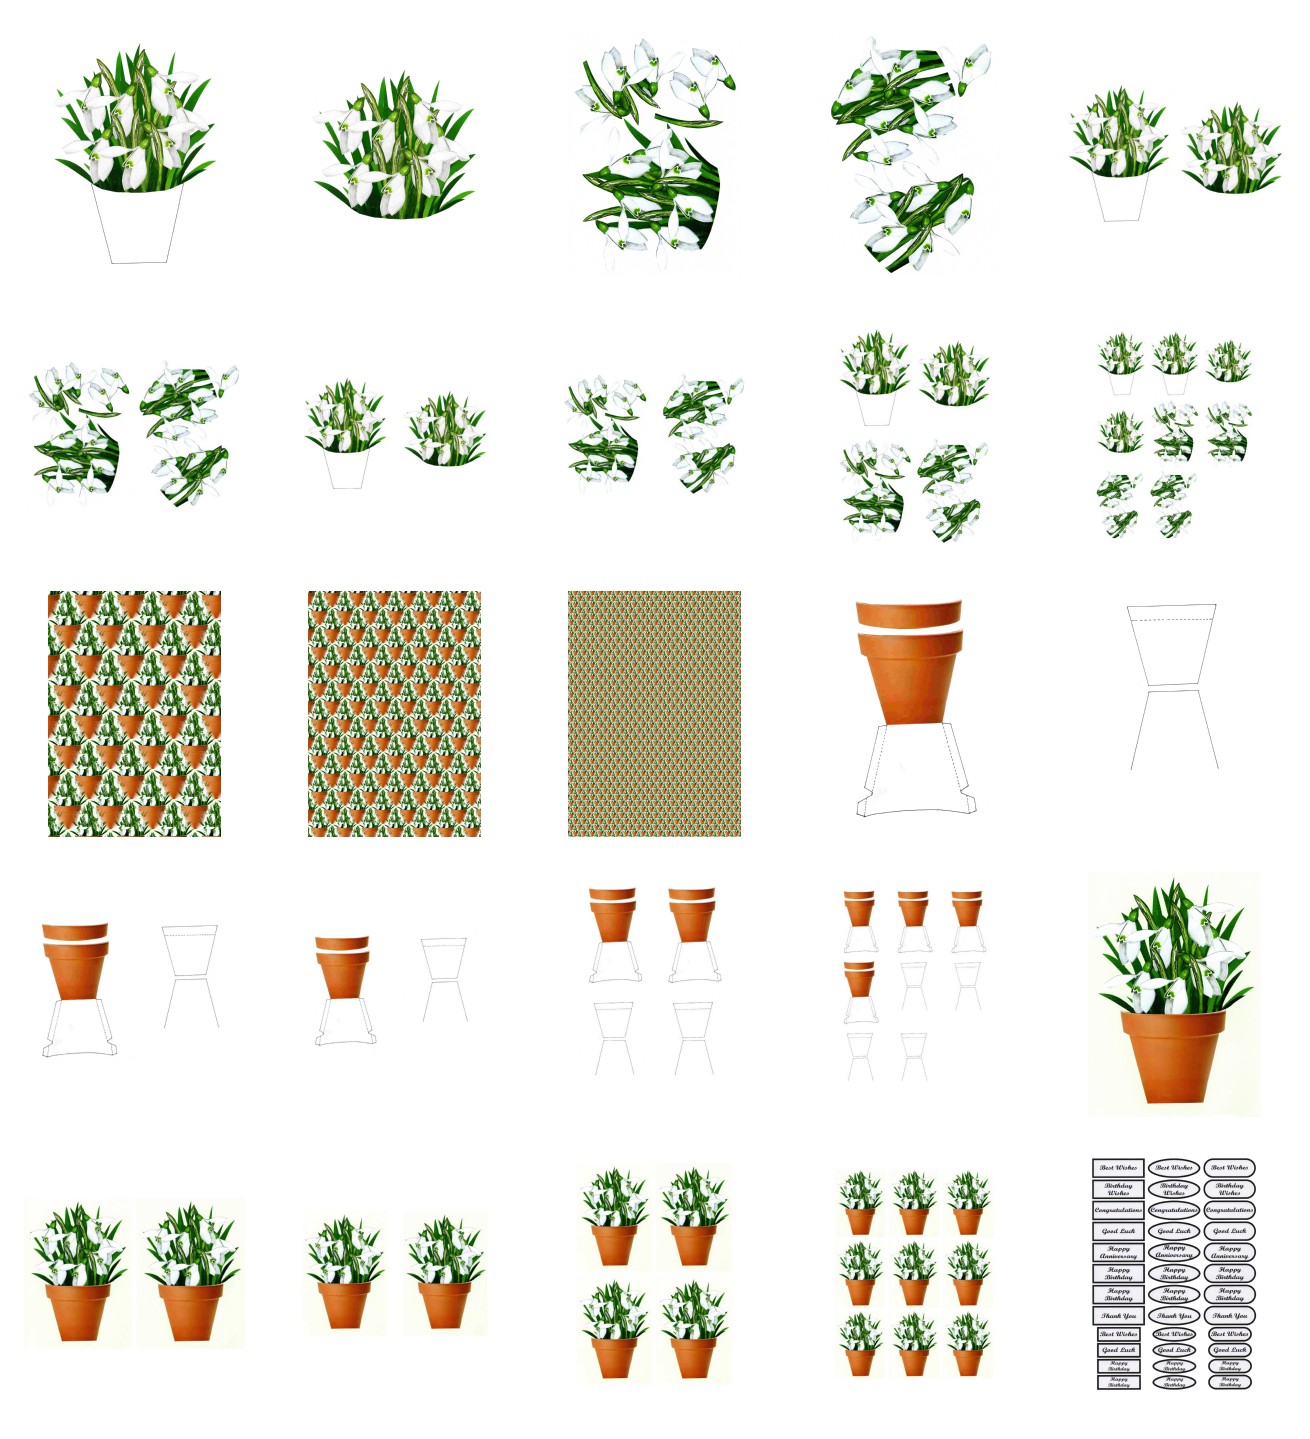 Spring Snowdrop Flowers Set 01 - 25 Pages to Download